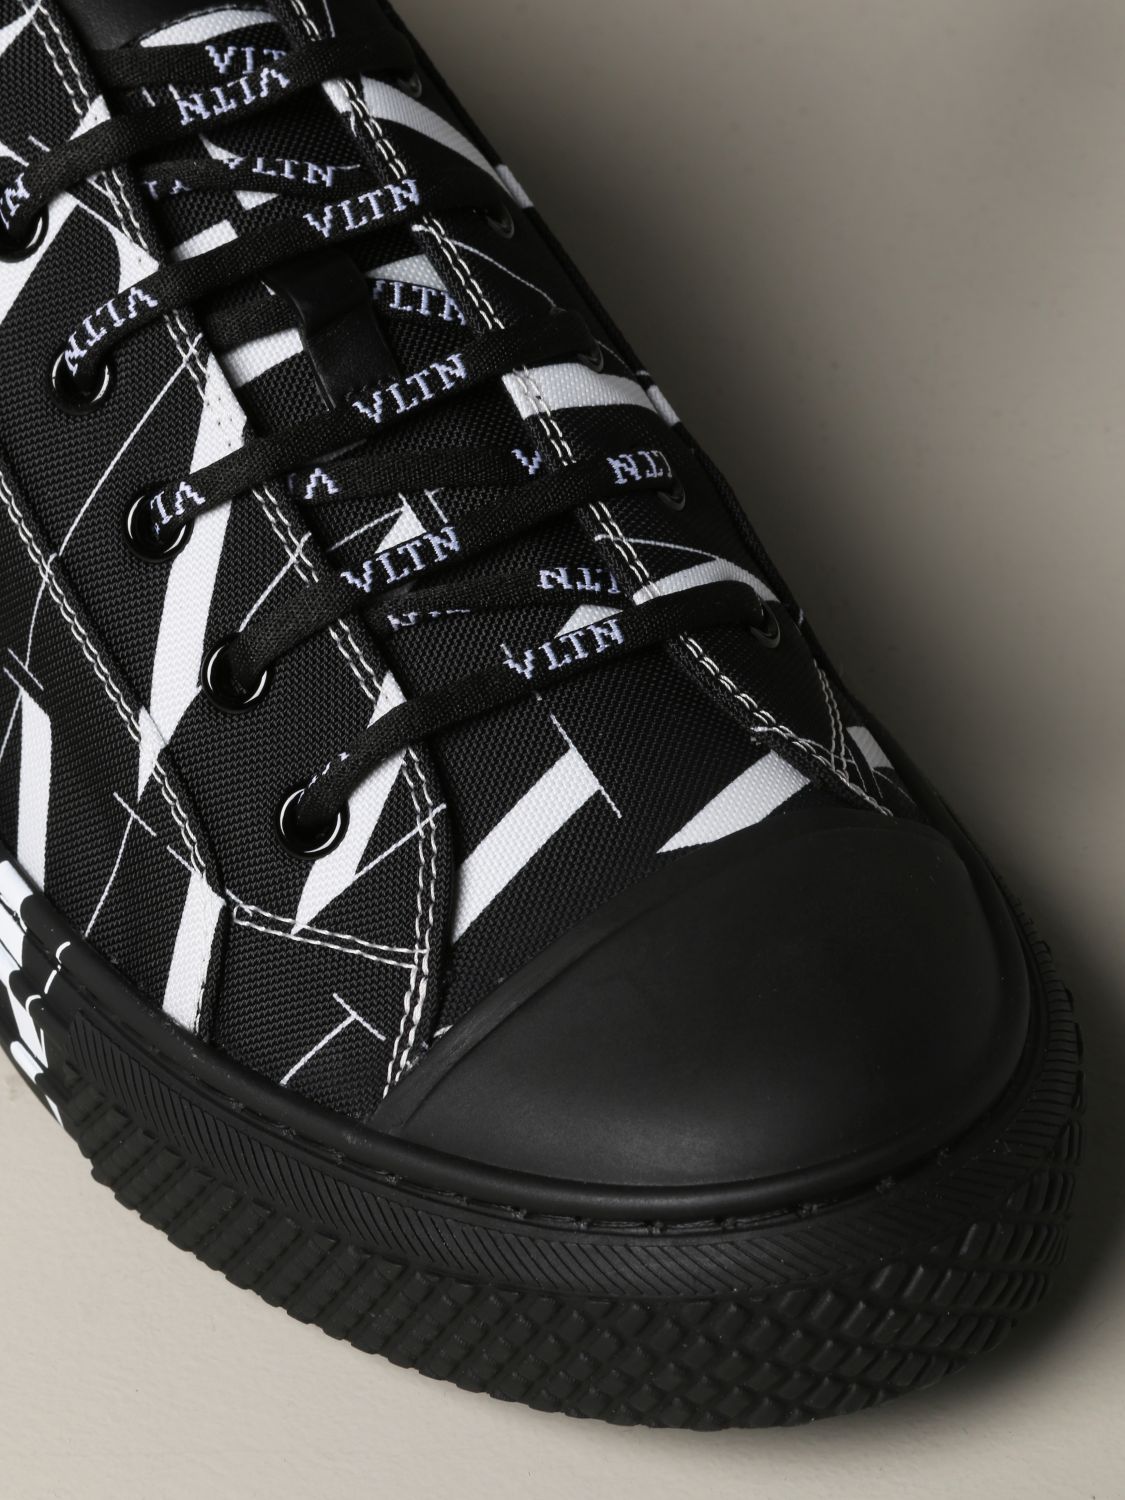 valentino canvas shoes